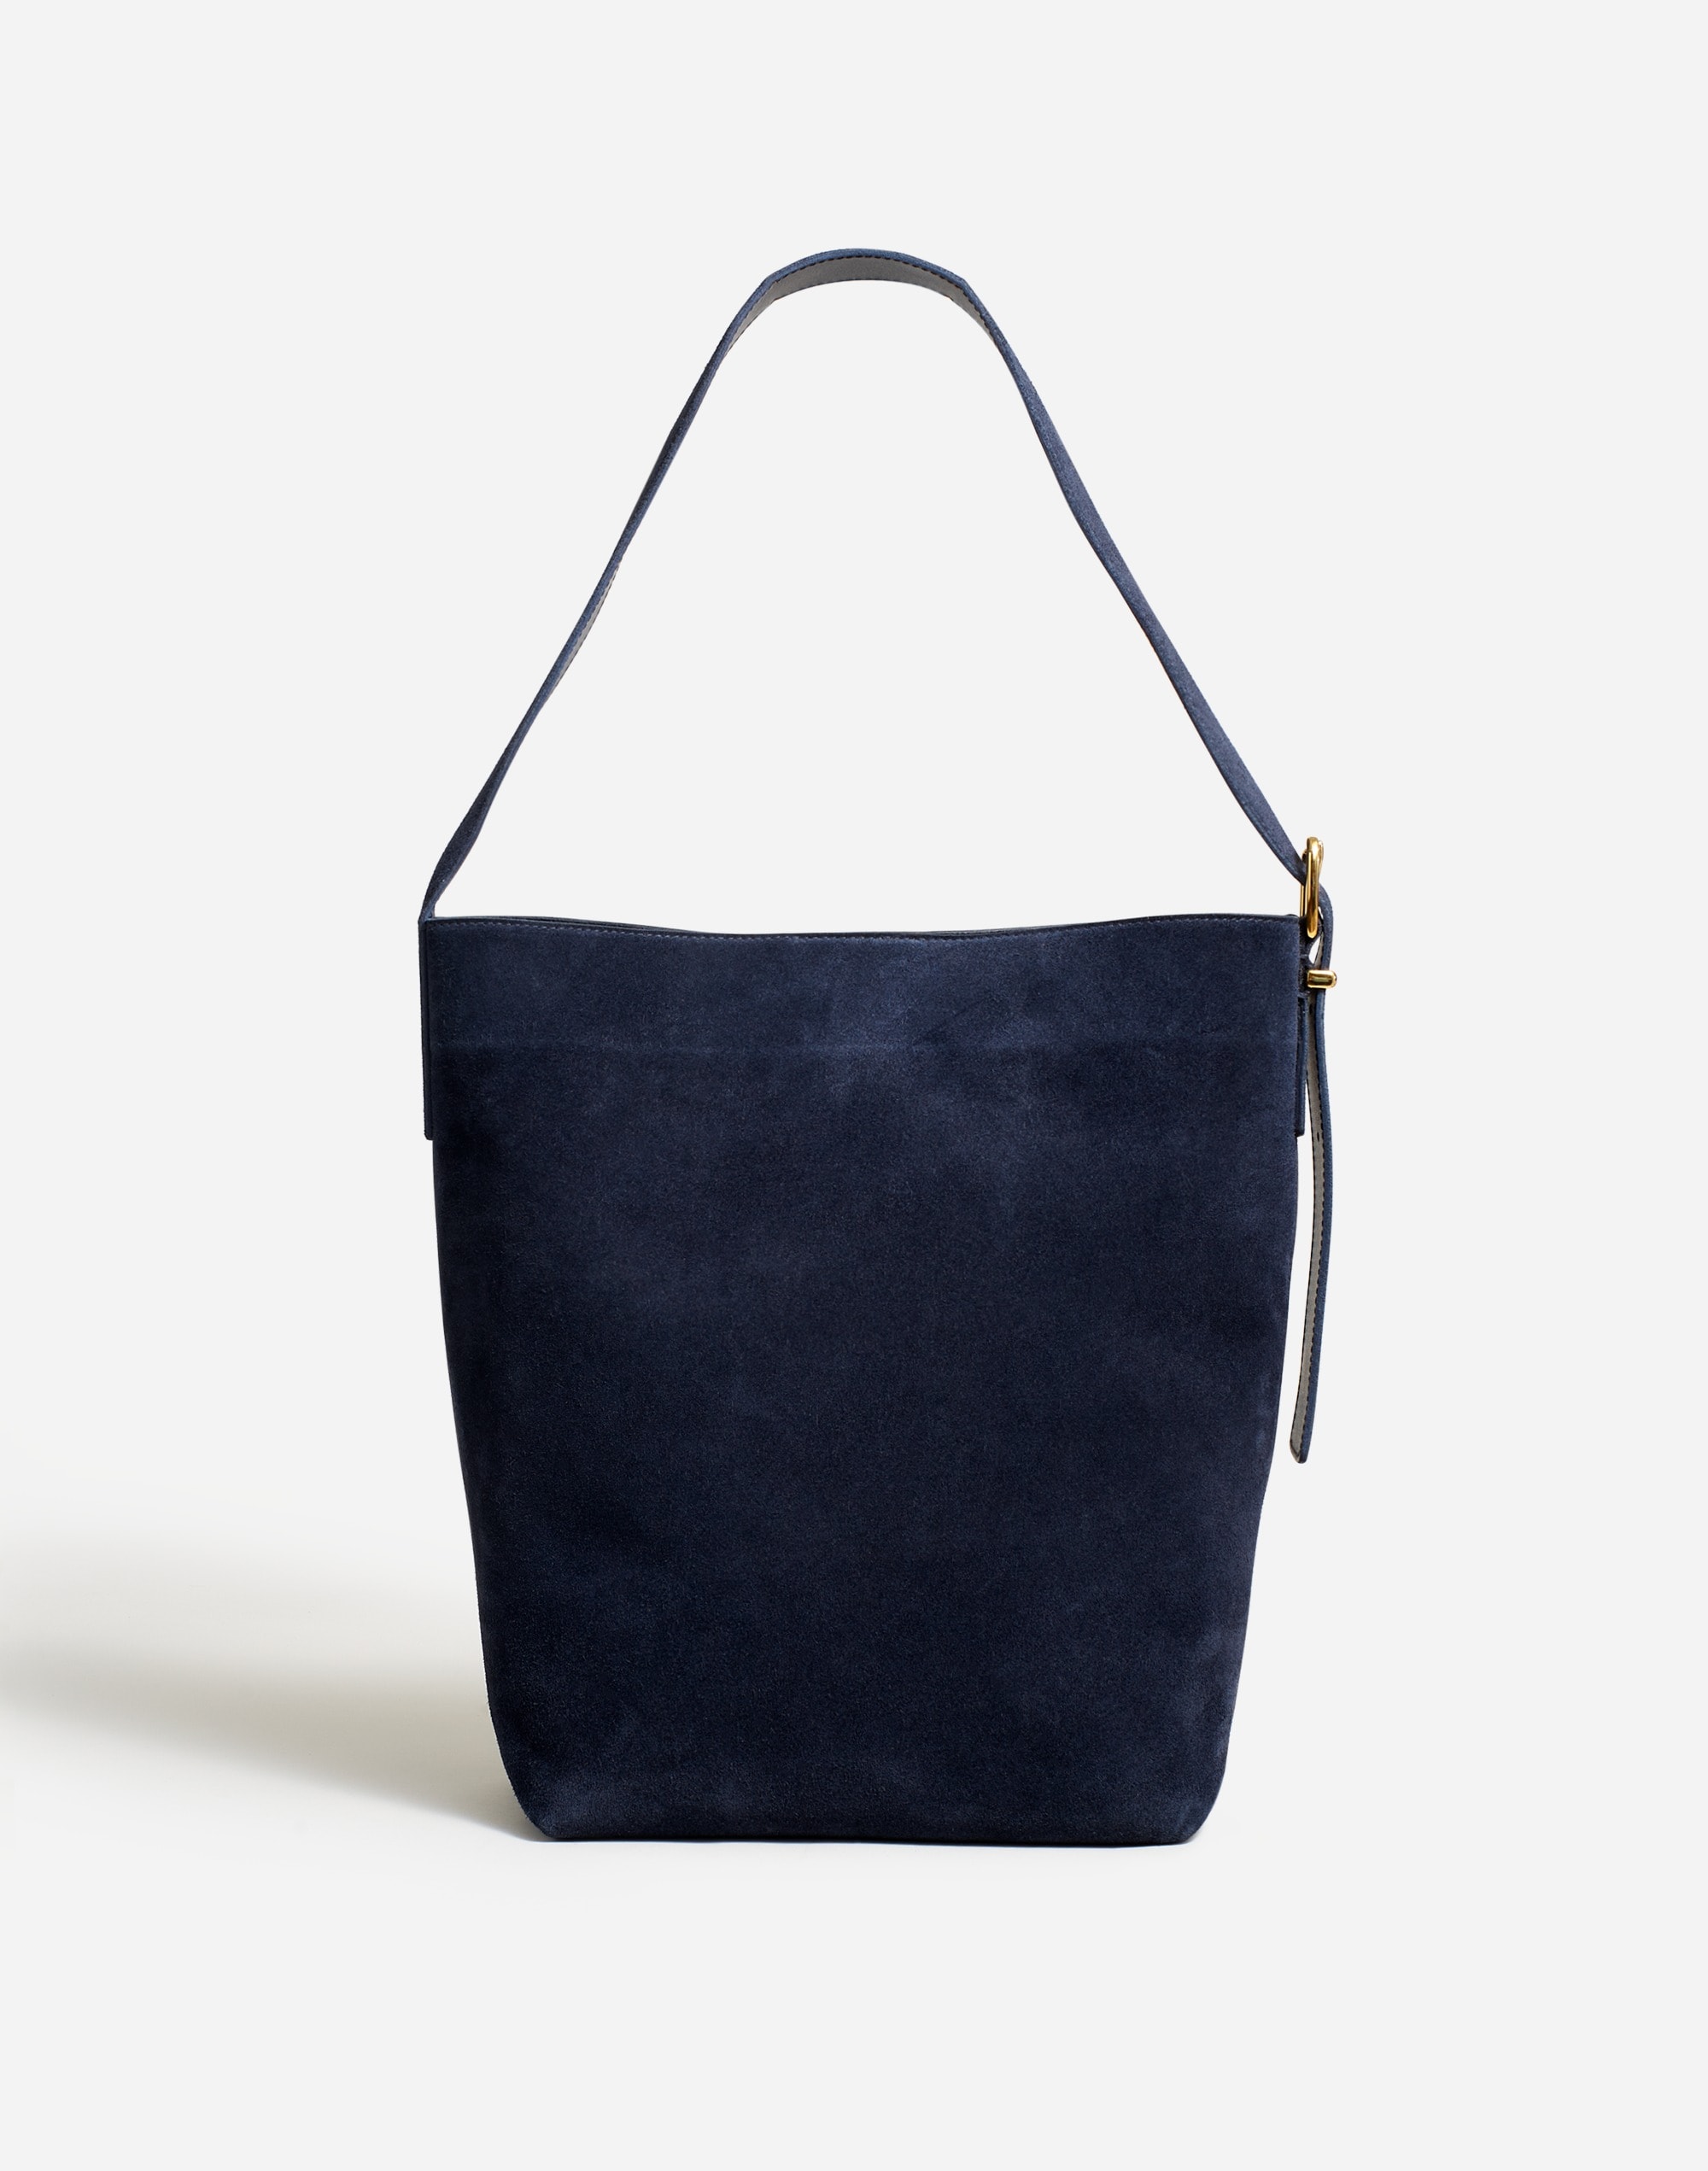 Clare V, Bags, Clare V Tote Navy Blue Suede